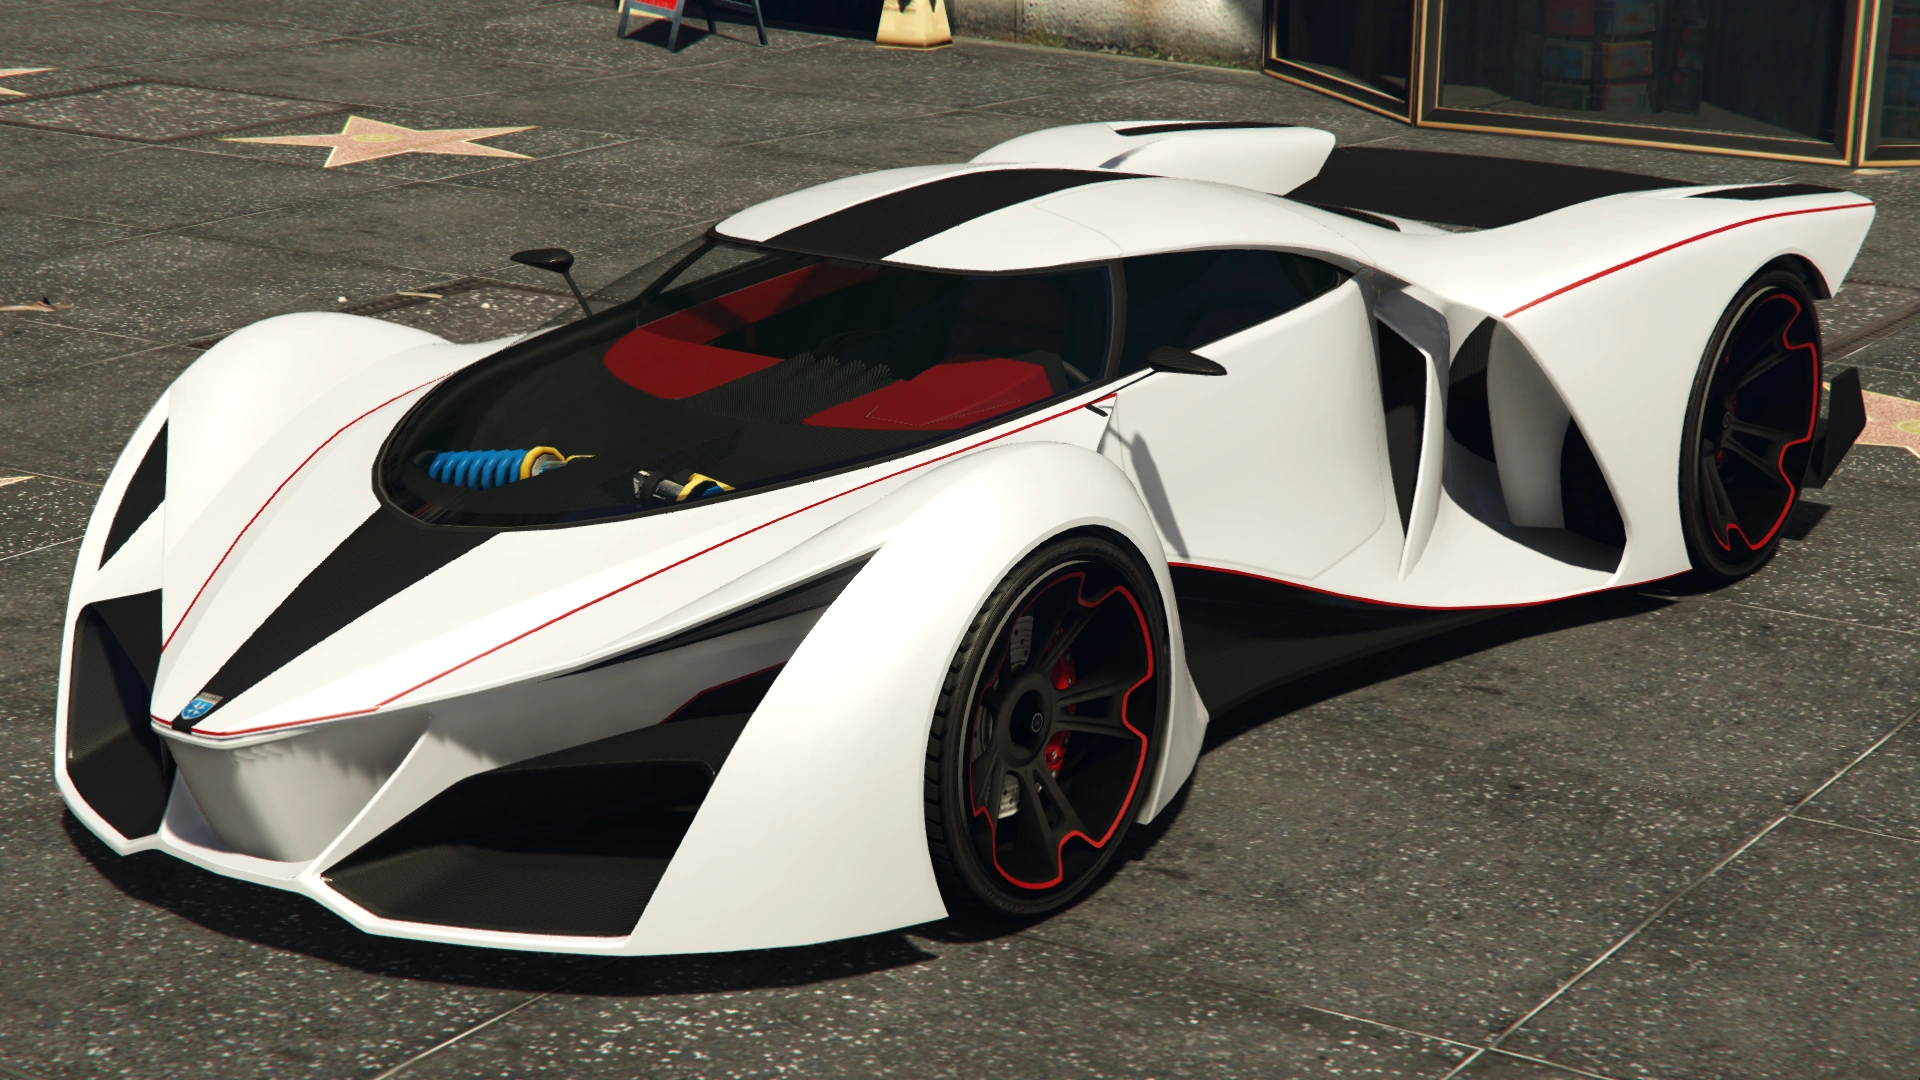 Car Added Grotti X80 Proto- GTA 5 updated vehicles, new maps for gamers